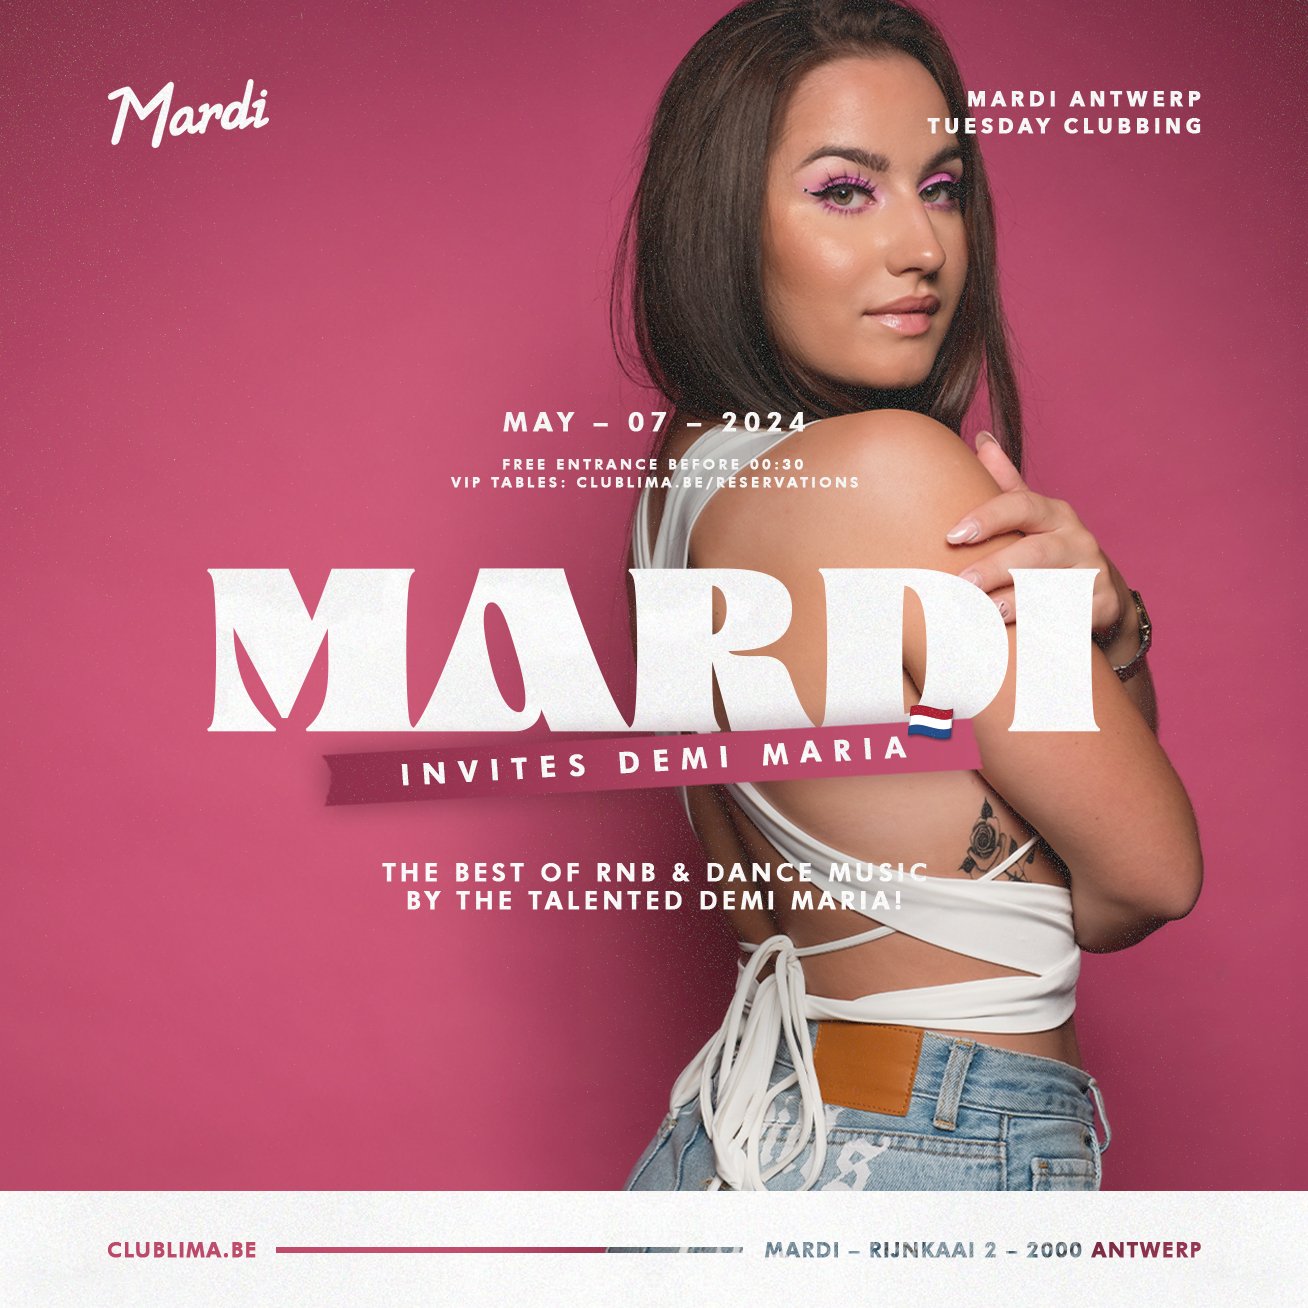 THIS WEEK ON THE MENU: 
TUE | @mardi_antwerp invites @demimariaw 🇳🇱
WED | THIS SENORITA NEEDS A MARGHARITA (next day public holiday) 🍸
FRI | @badhabitsfridays DOWNTOWNFRESH 
SAT | LIRICAL LIVE ON STAGE 🎤
🎫 get your tickets via link in bio
🍾 vip